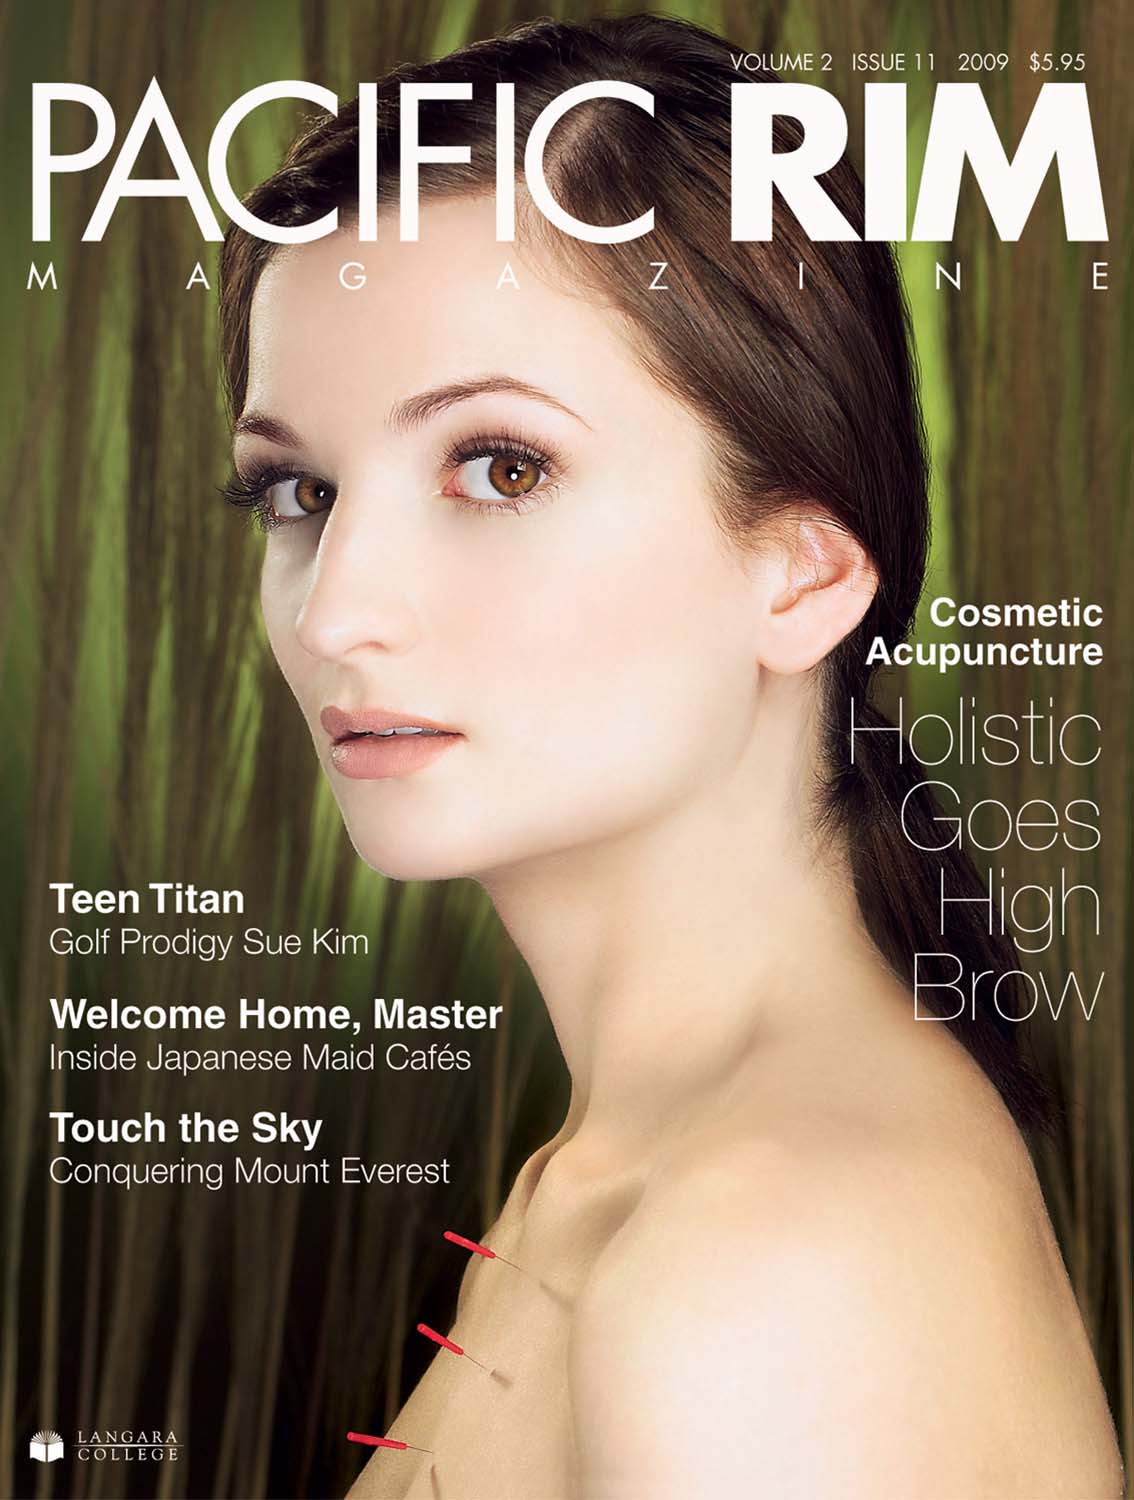 2009 Pacific Rim Cover. "Cosmetic Acupuncture" Cover story. Image of woman's face.